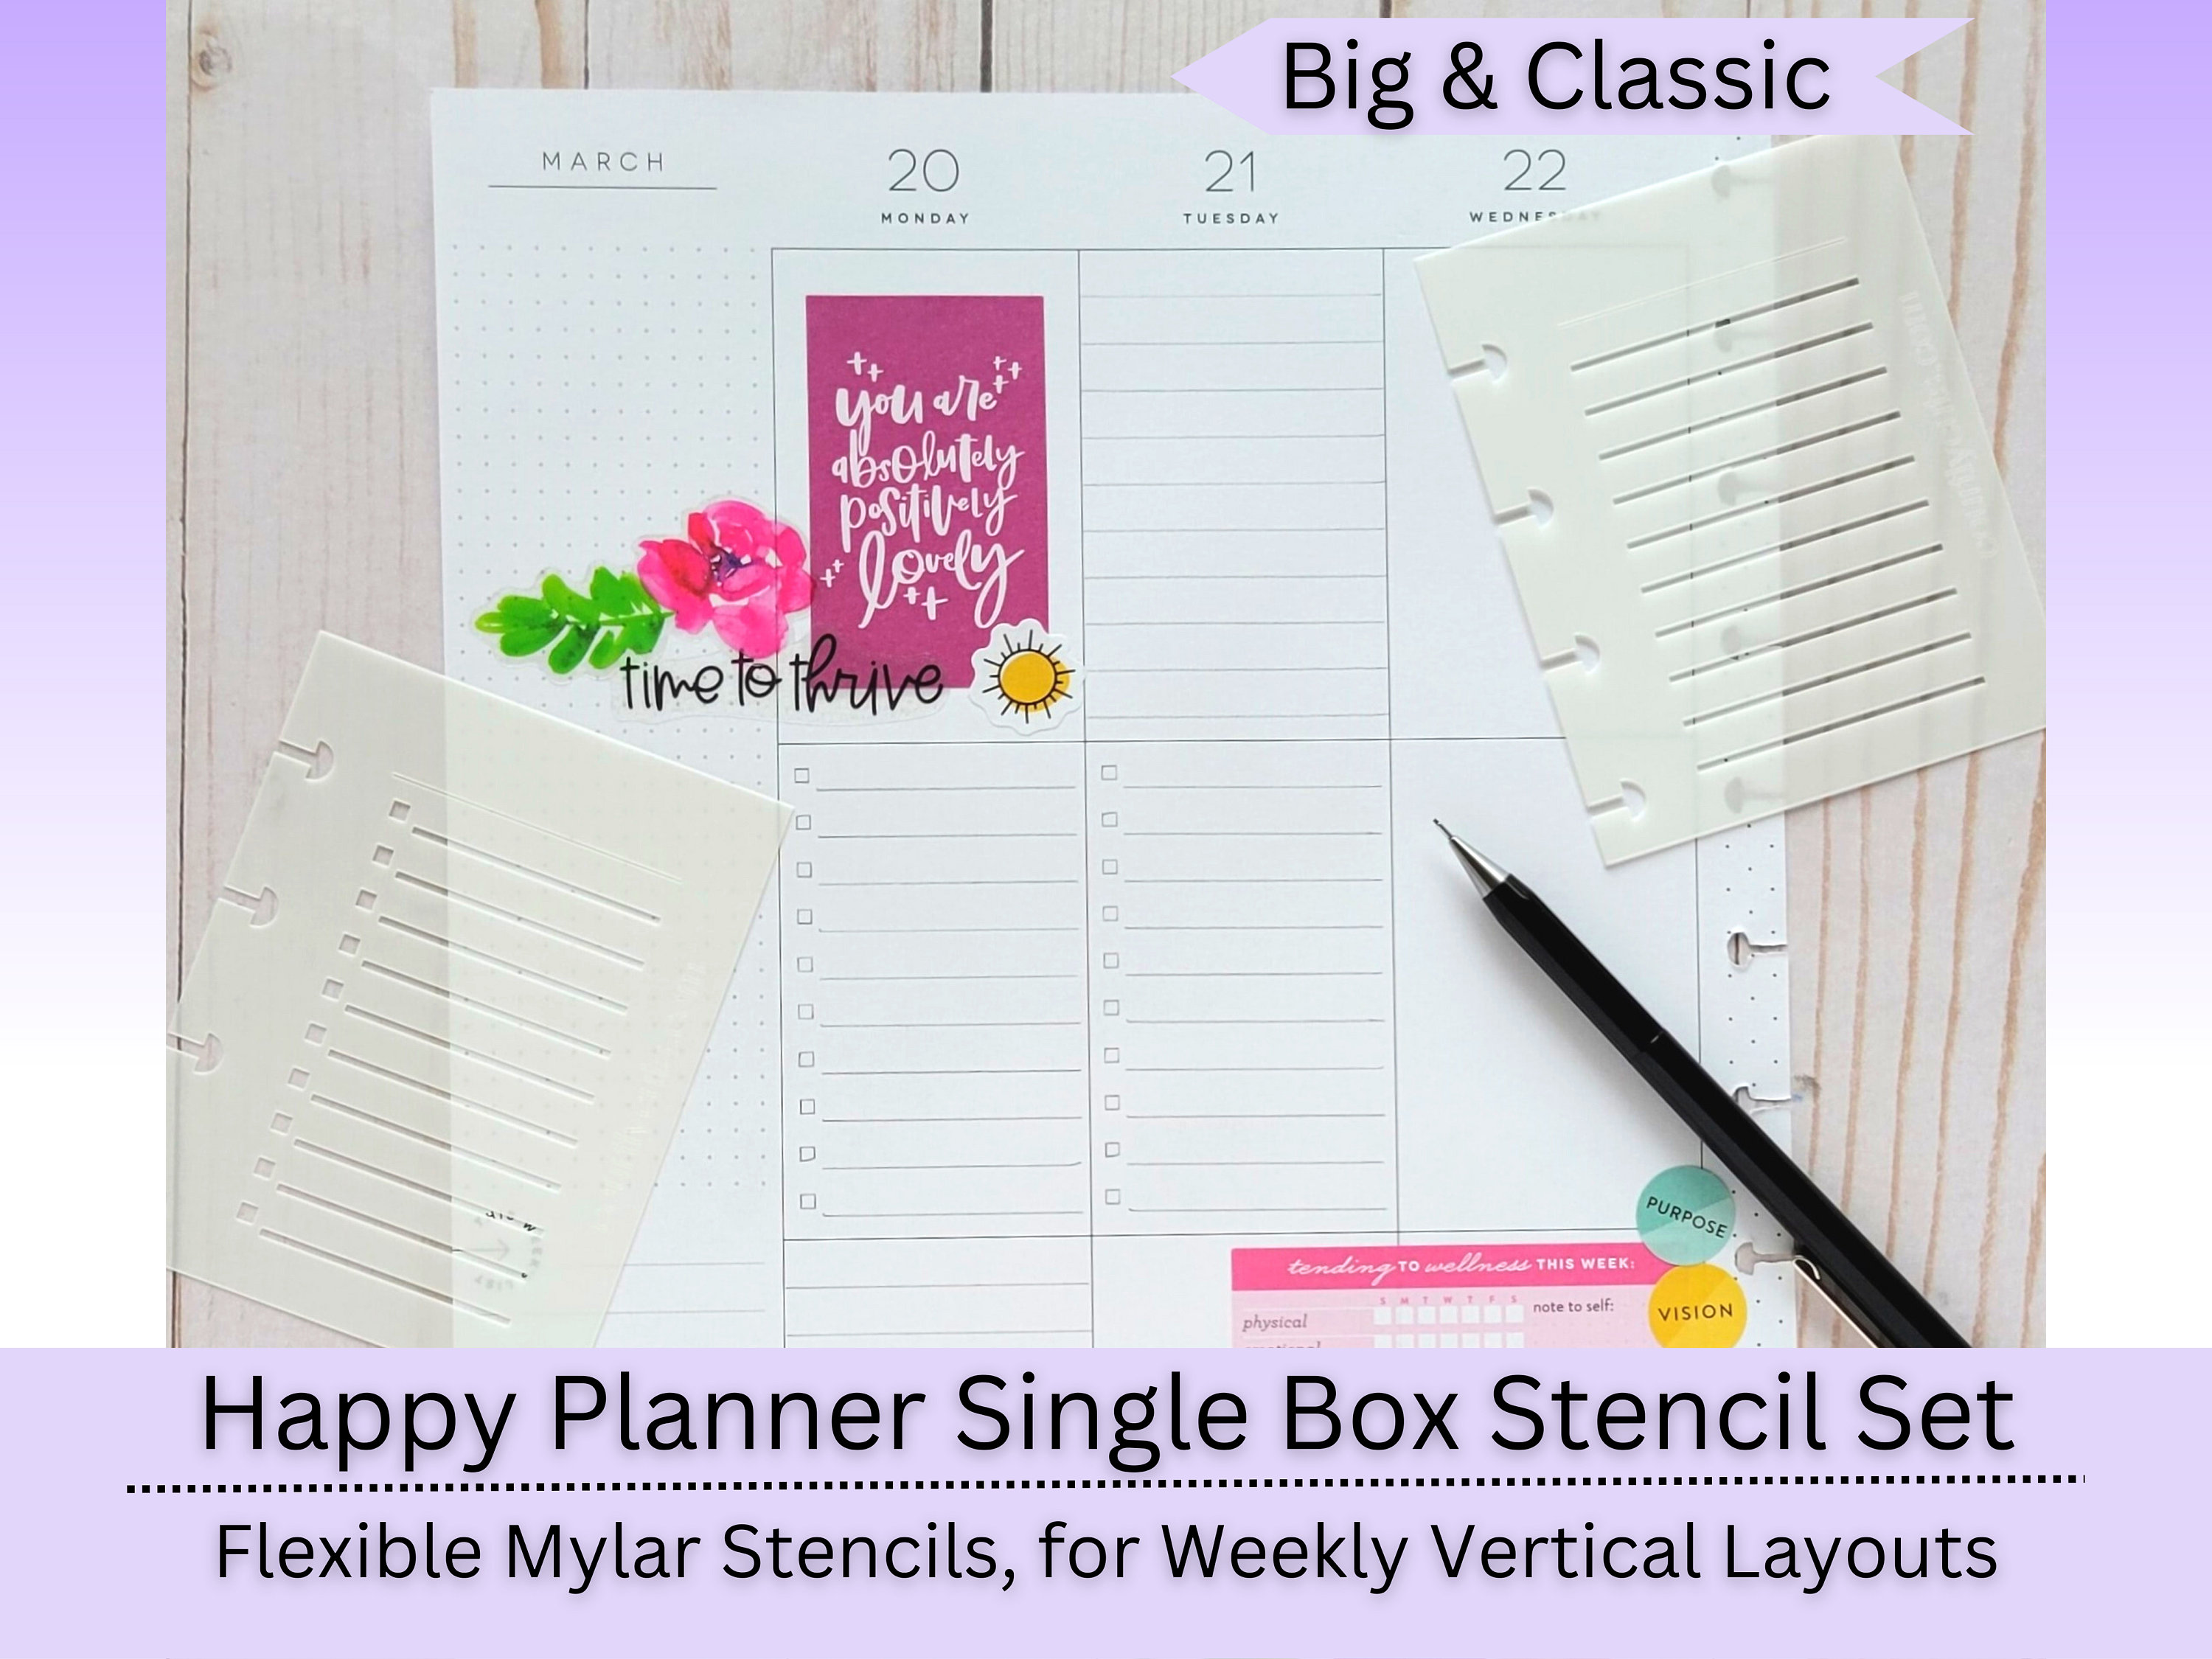 Easy to Use Stencil Set for Dotted Journals - Time Saving Planner  Accessories/Supplies Kit Makes Creating Layouts Easy - Incl. Bullet Point